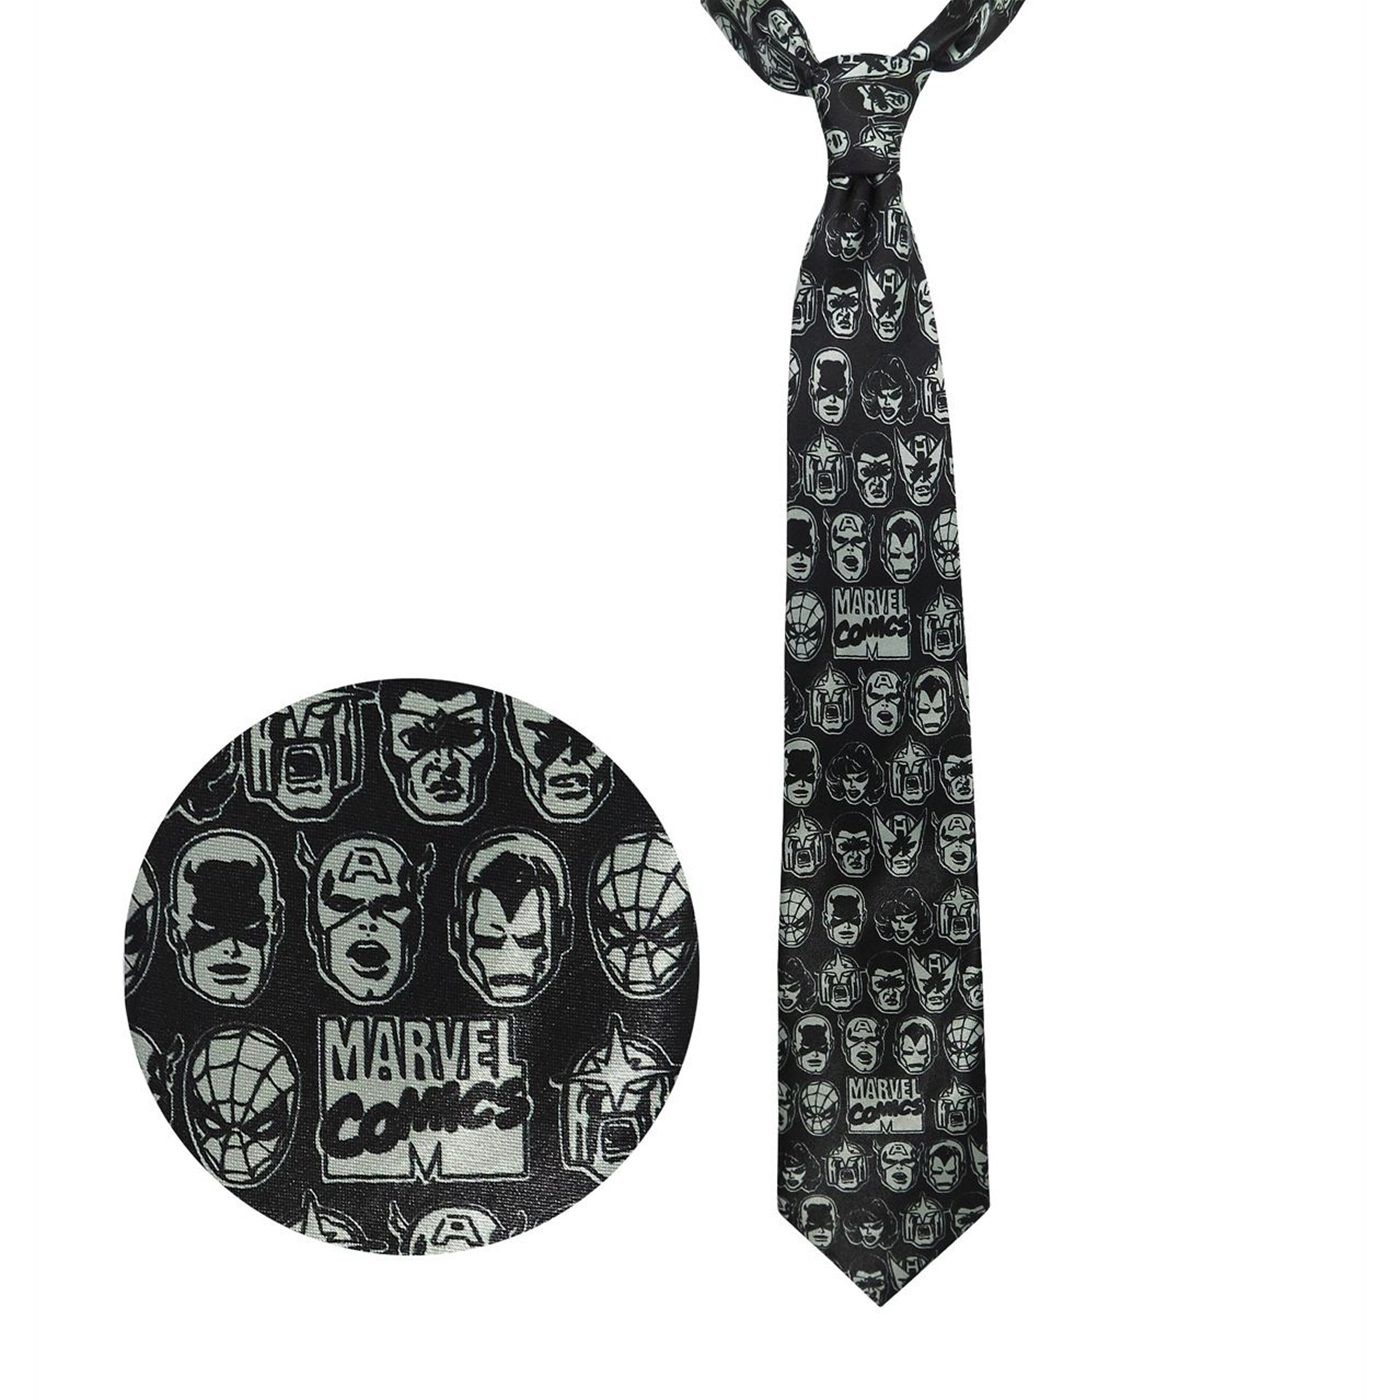 Marvel Heads All-Over Print Tie